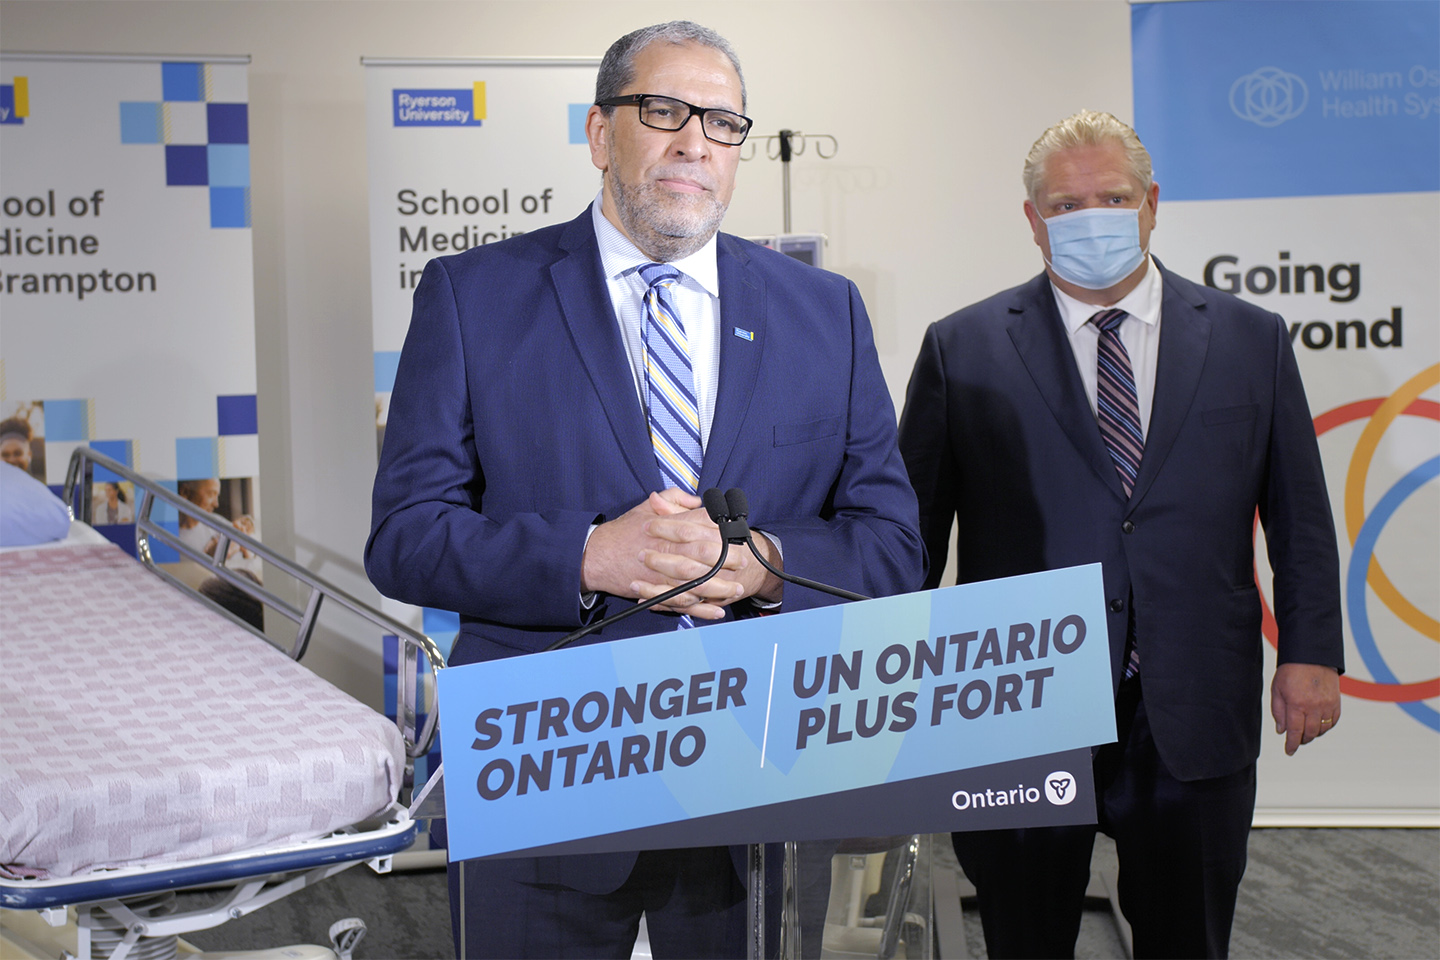 TMU President Mohamed Lachemi stands at a podium displaying a sign that reads Stronger Ontario with the Province of Ontario logo. Toronto Premier Doug Ford stands behind him wearing a mask.